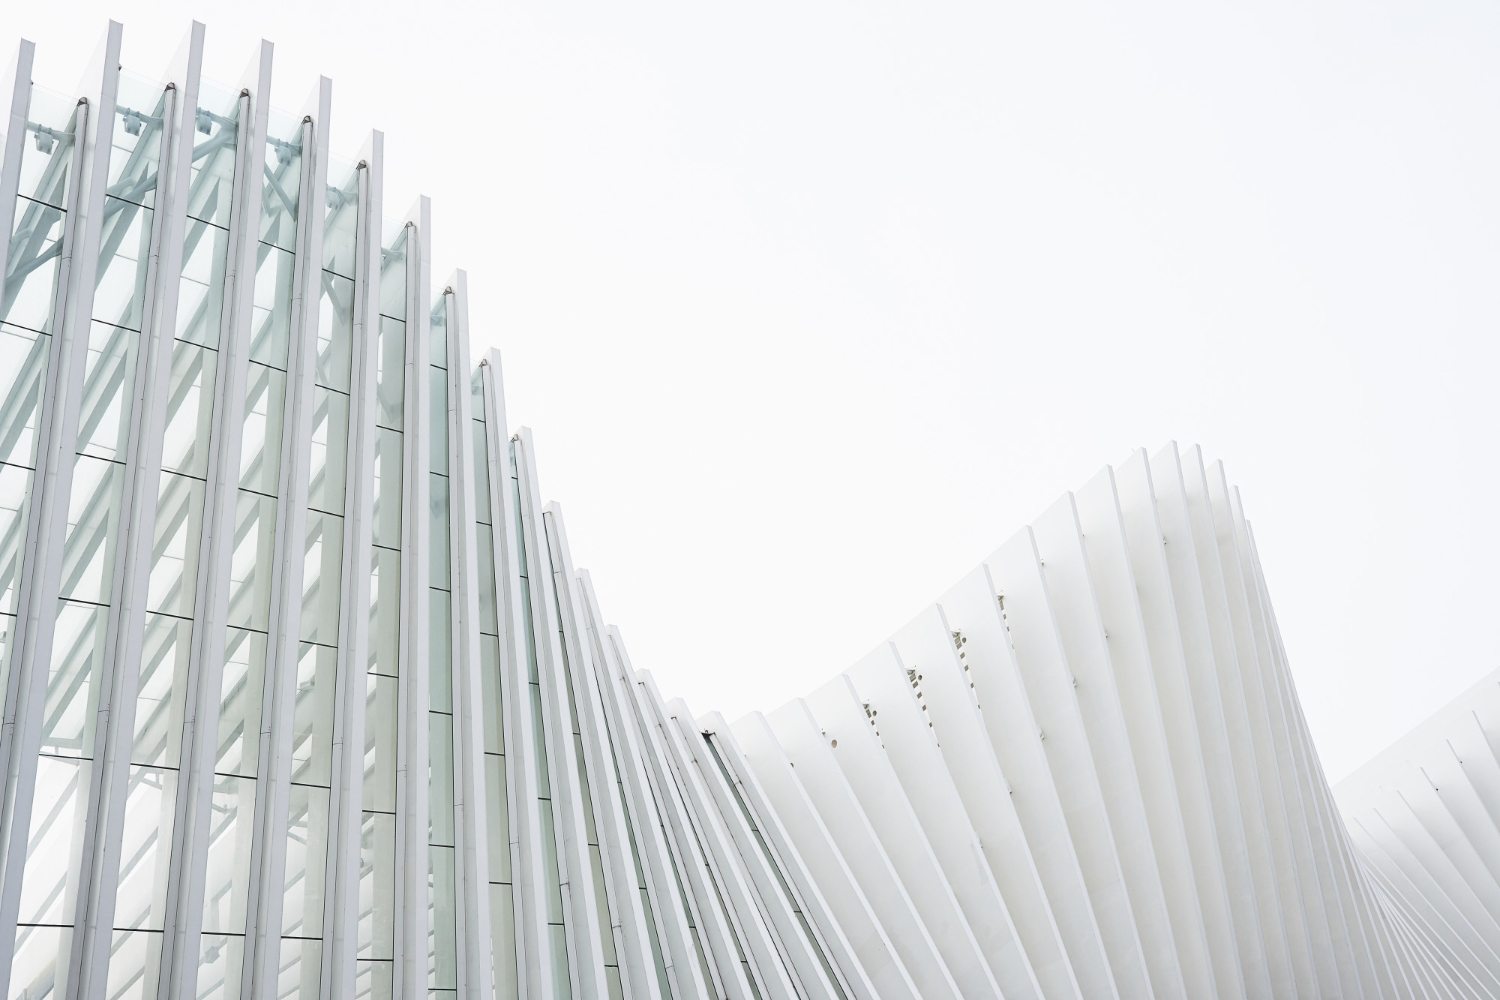 Abstract buildings with white metallic ribs and glass windows